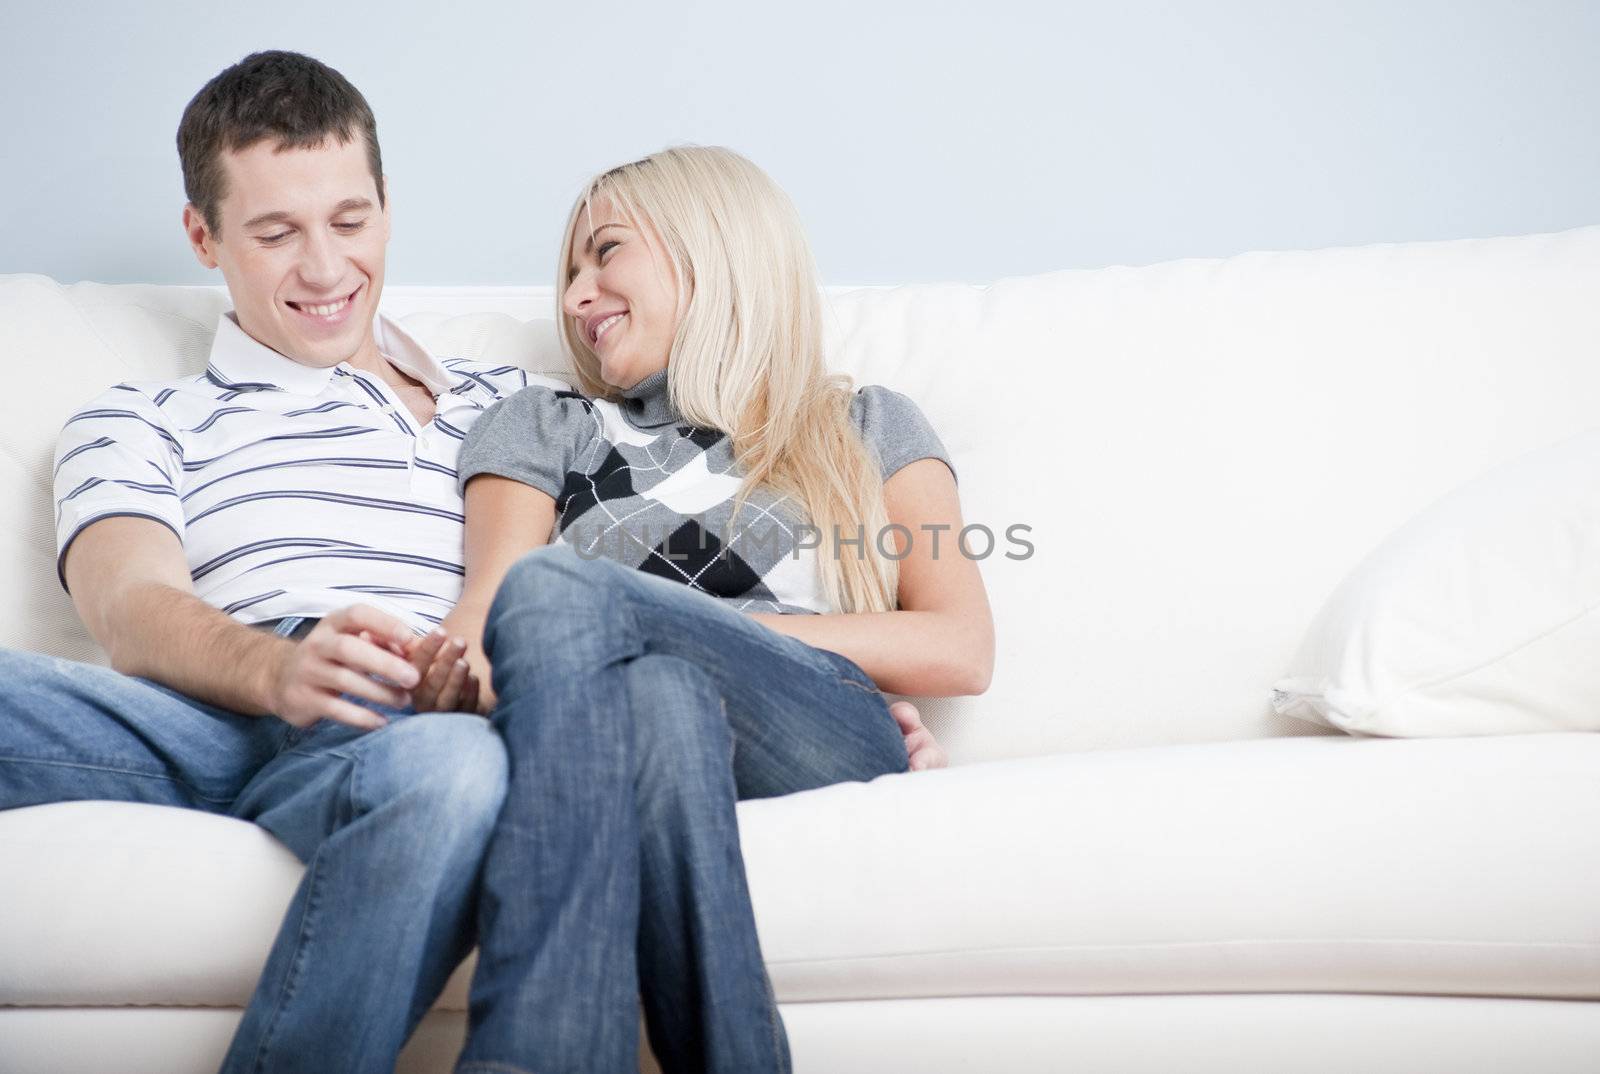 Cropped view of affectionate couple laughing and relaxing together on white couch. Horizontal format.